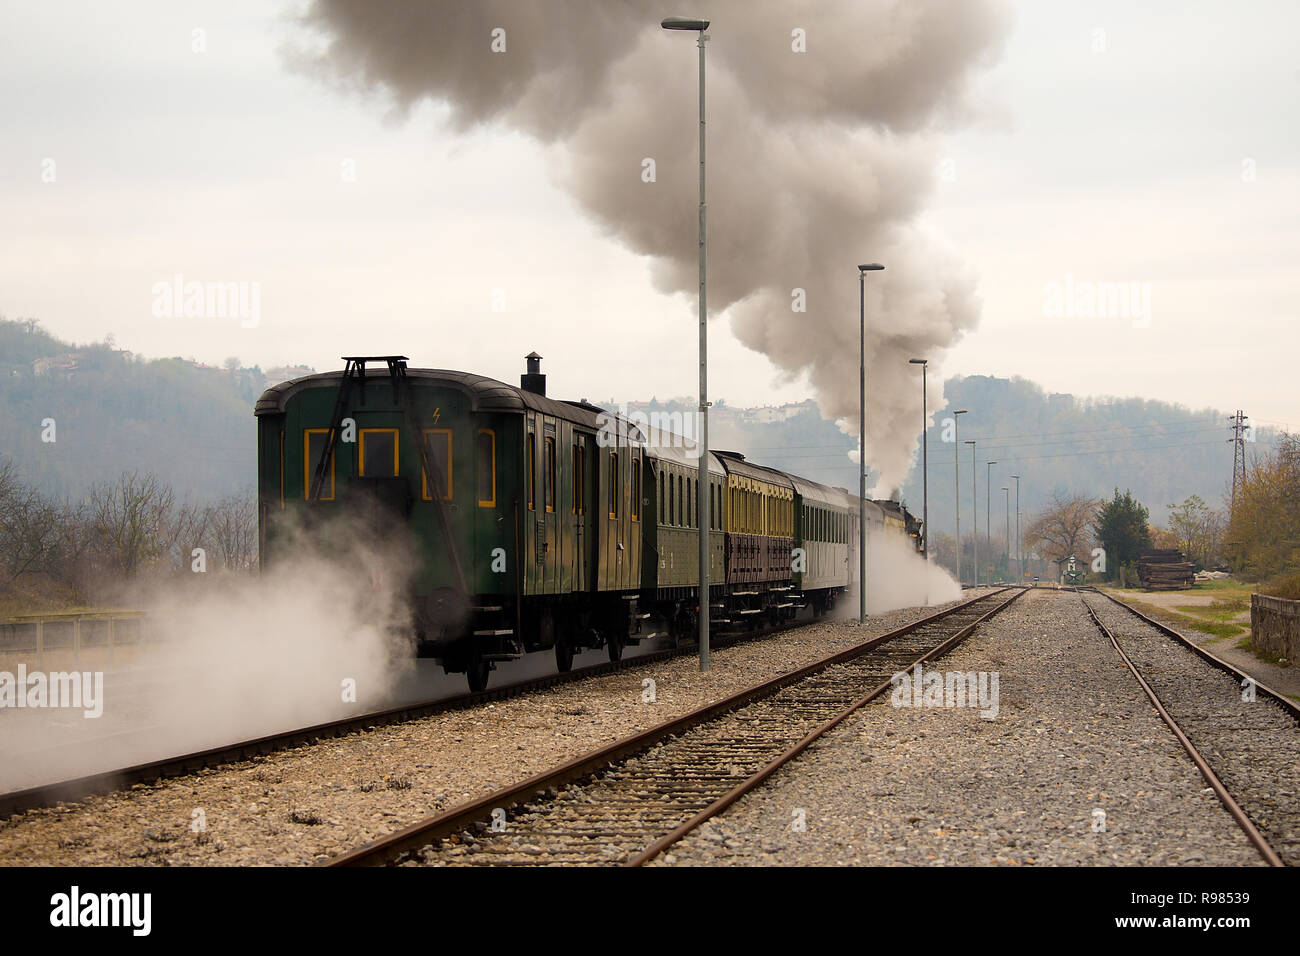 Old steam train leaving the railway station in Nova Gorica, Slovenia, Europe. Lots of black and gray steam hiding the locomotive Stock Photo